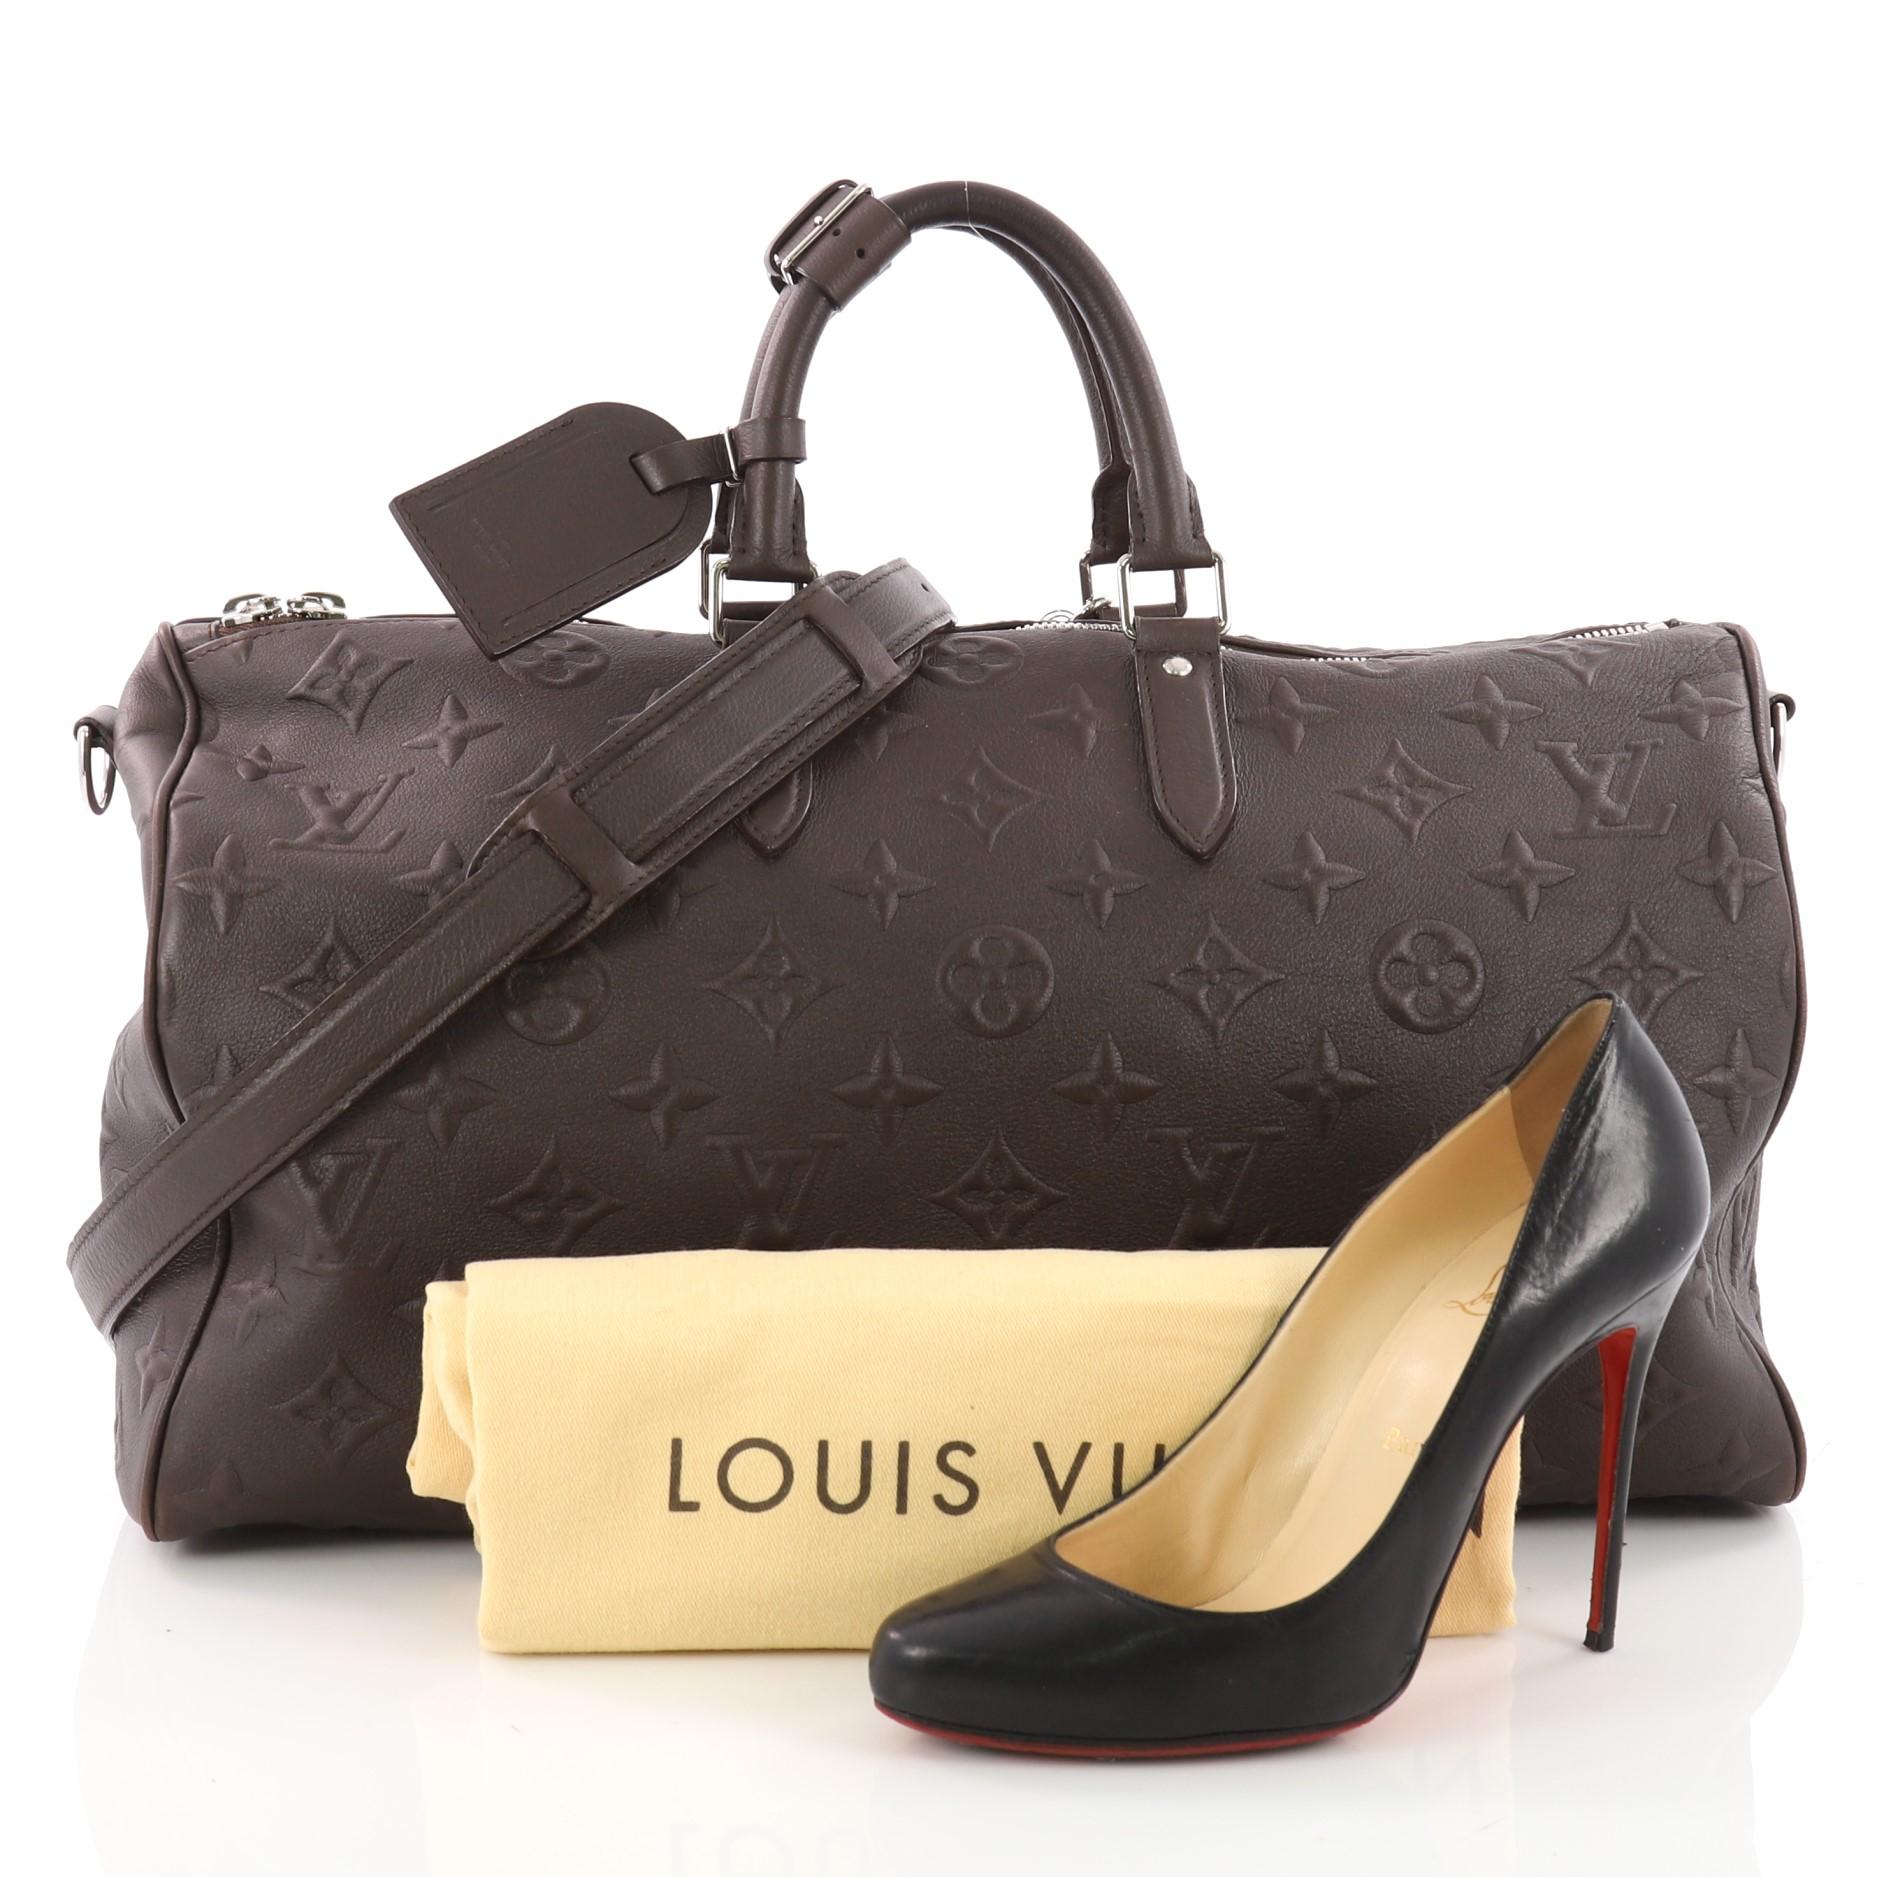 This authentic Louis Vuitton Keepall Bandouliere Bag Monogram Revelation 45 is the perfect purchase for a weekend trip, and can be effortlessly paired with any outfit from casual to formal. Crafted in brown monogram embossed calf leather, this